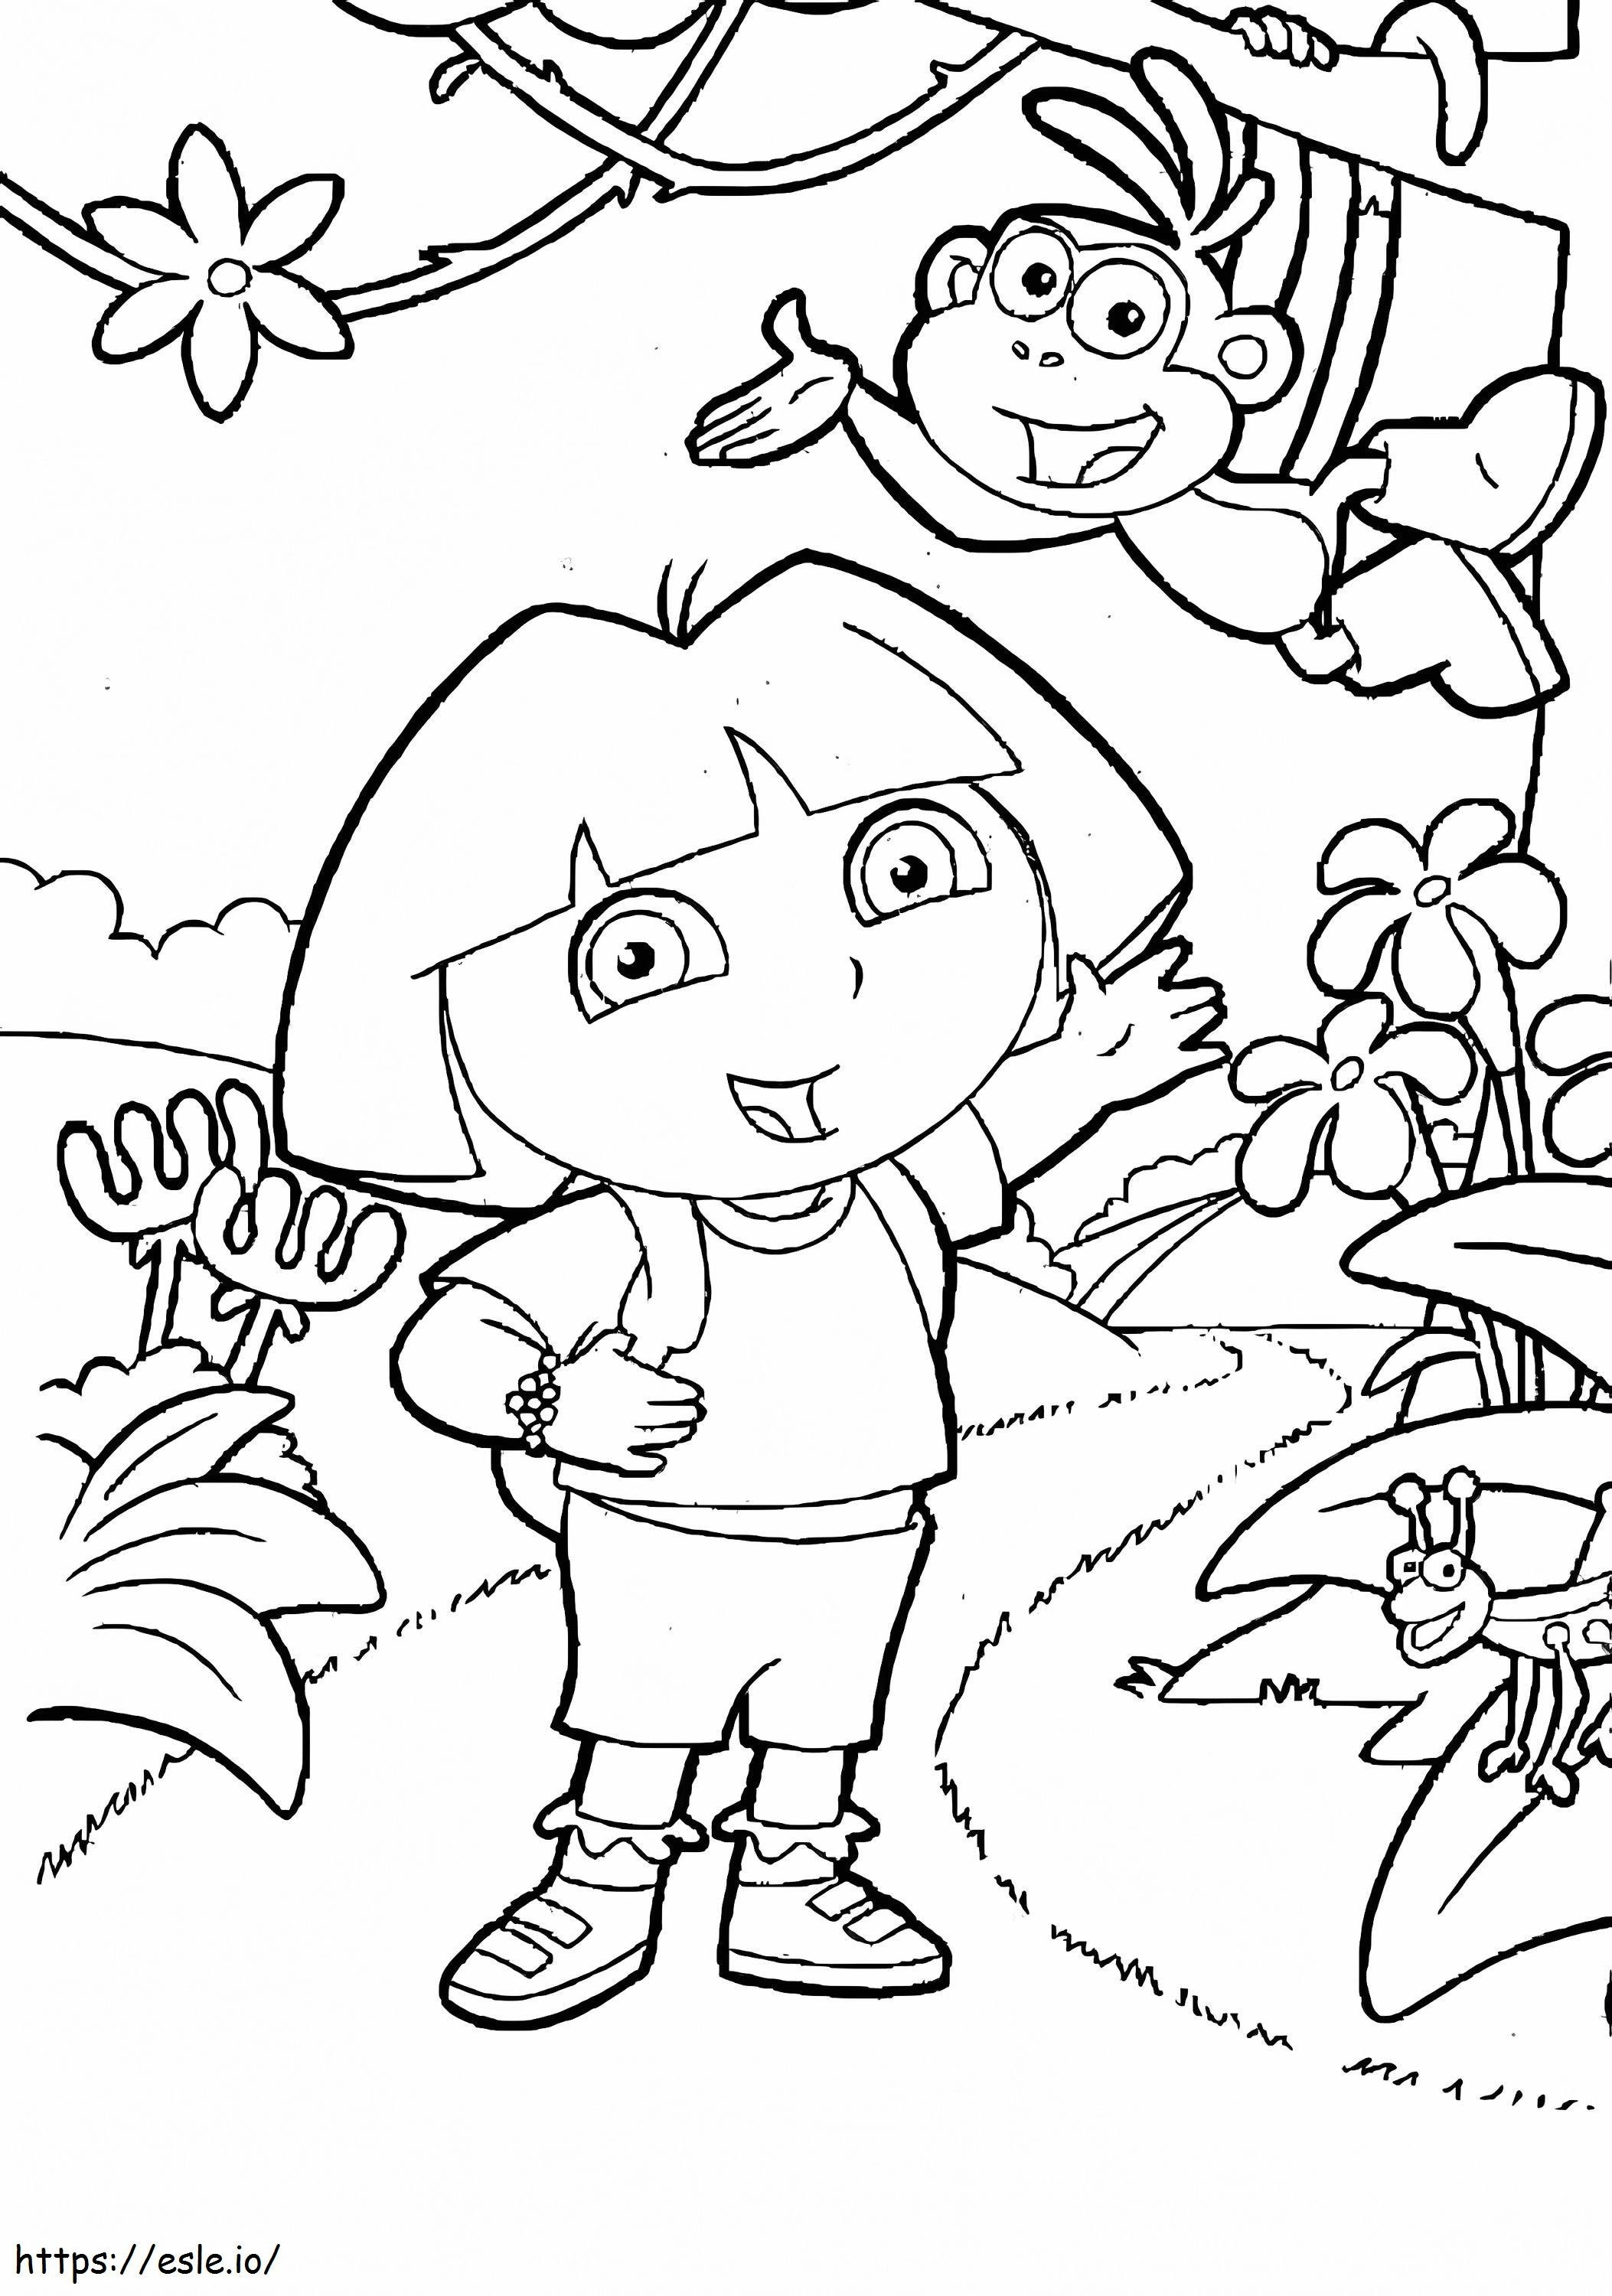 Dora And Boots In The Forest coloring page